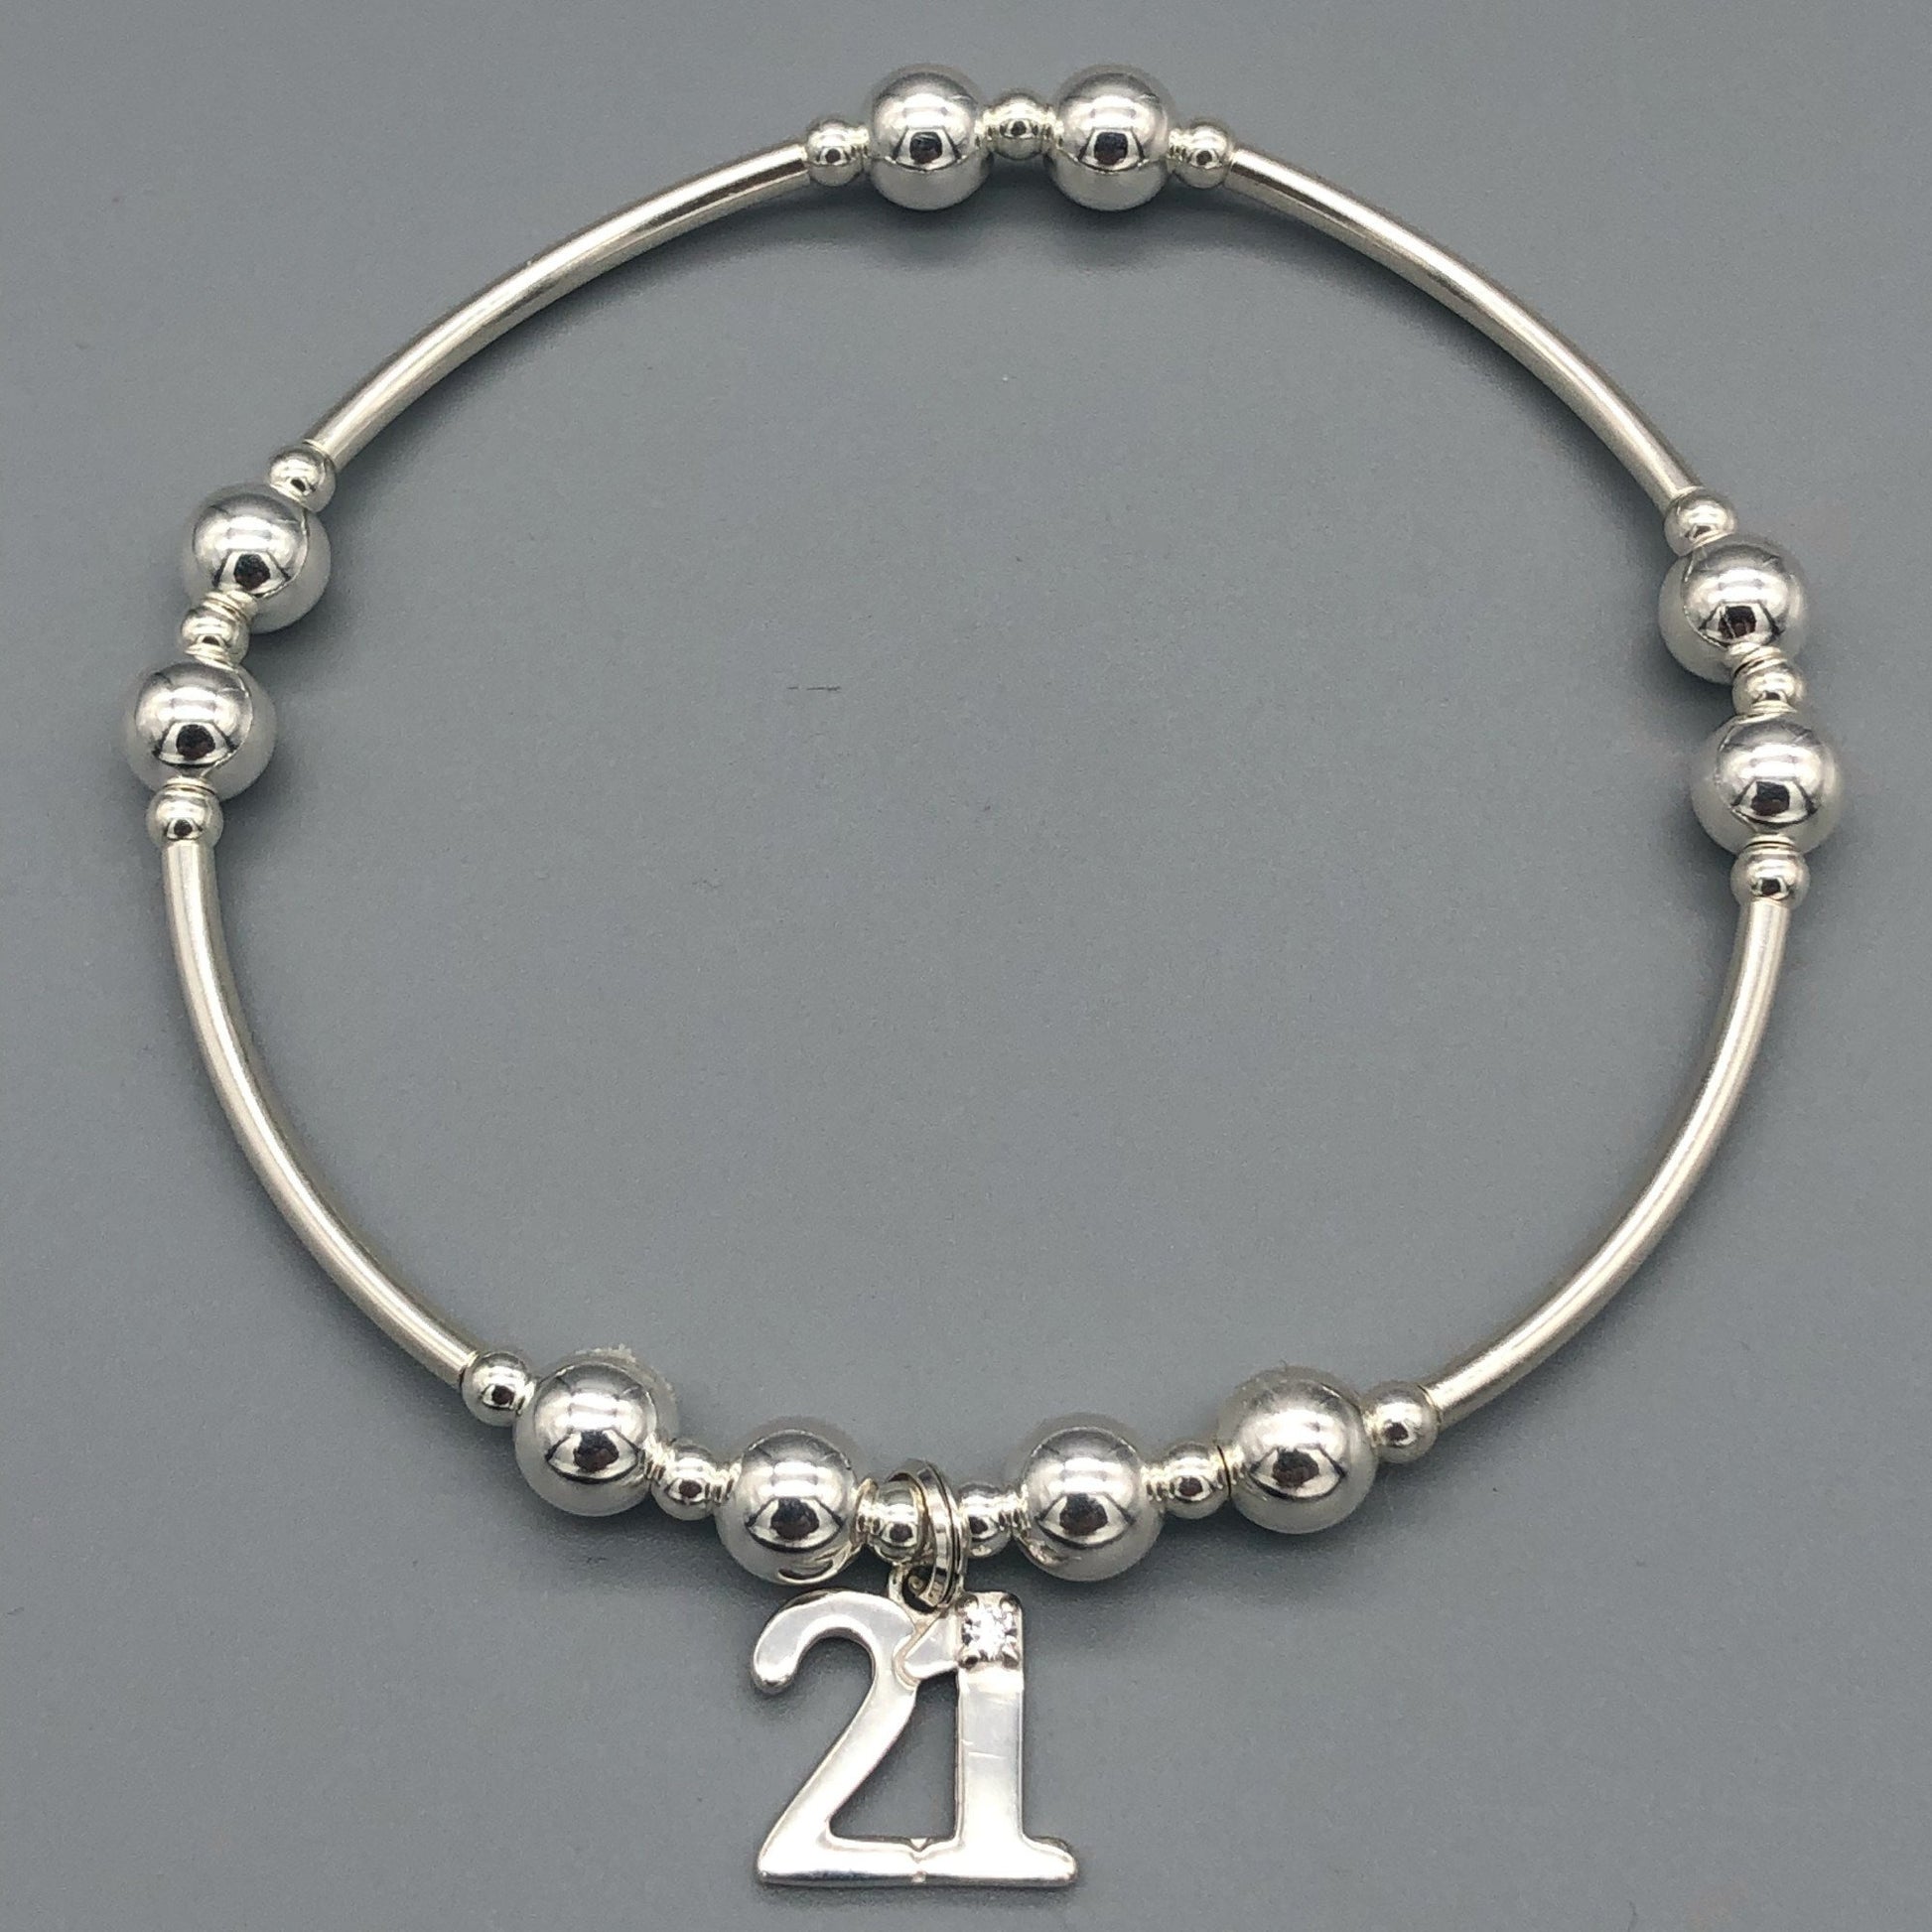 21st Birthday charm women's sterling silver stacking bracelet by My Silver Wish